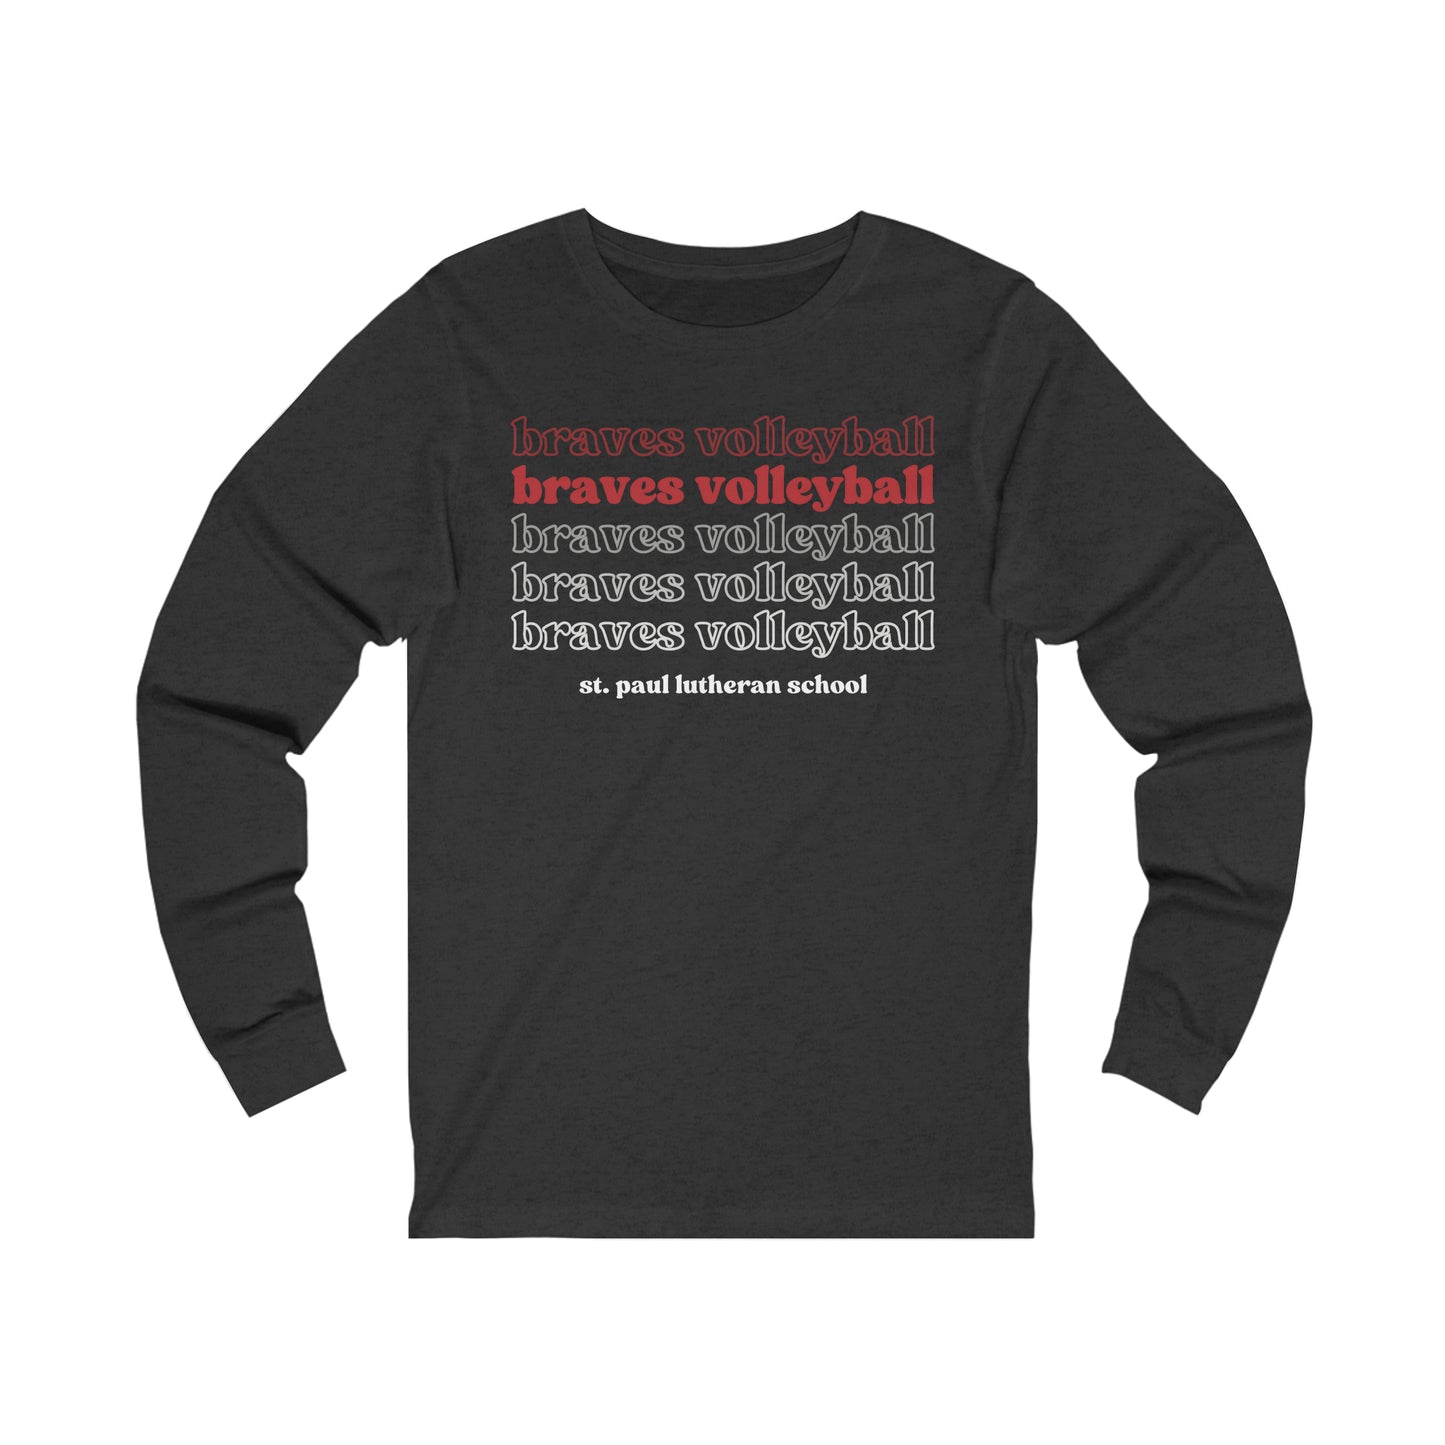 "braves volleyball" repeat | Adult Unisex Jersey Long Sleeve Tee | 5 Colors